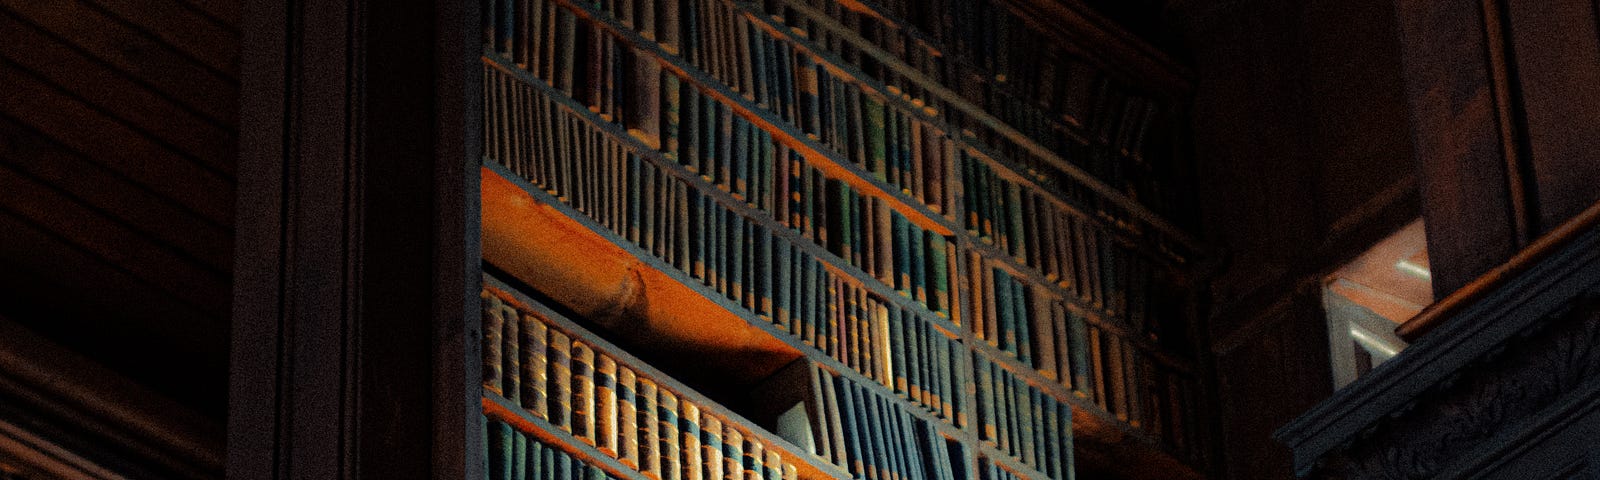 library shelves in the dark of night